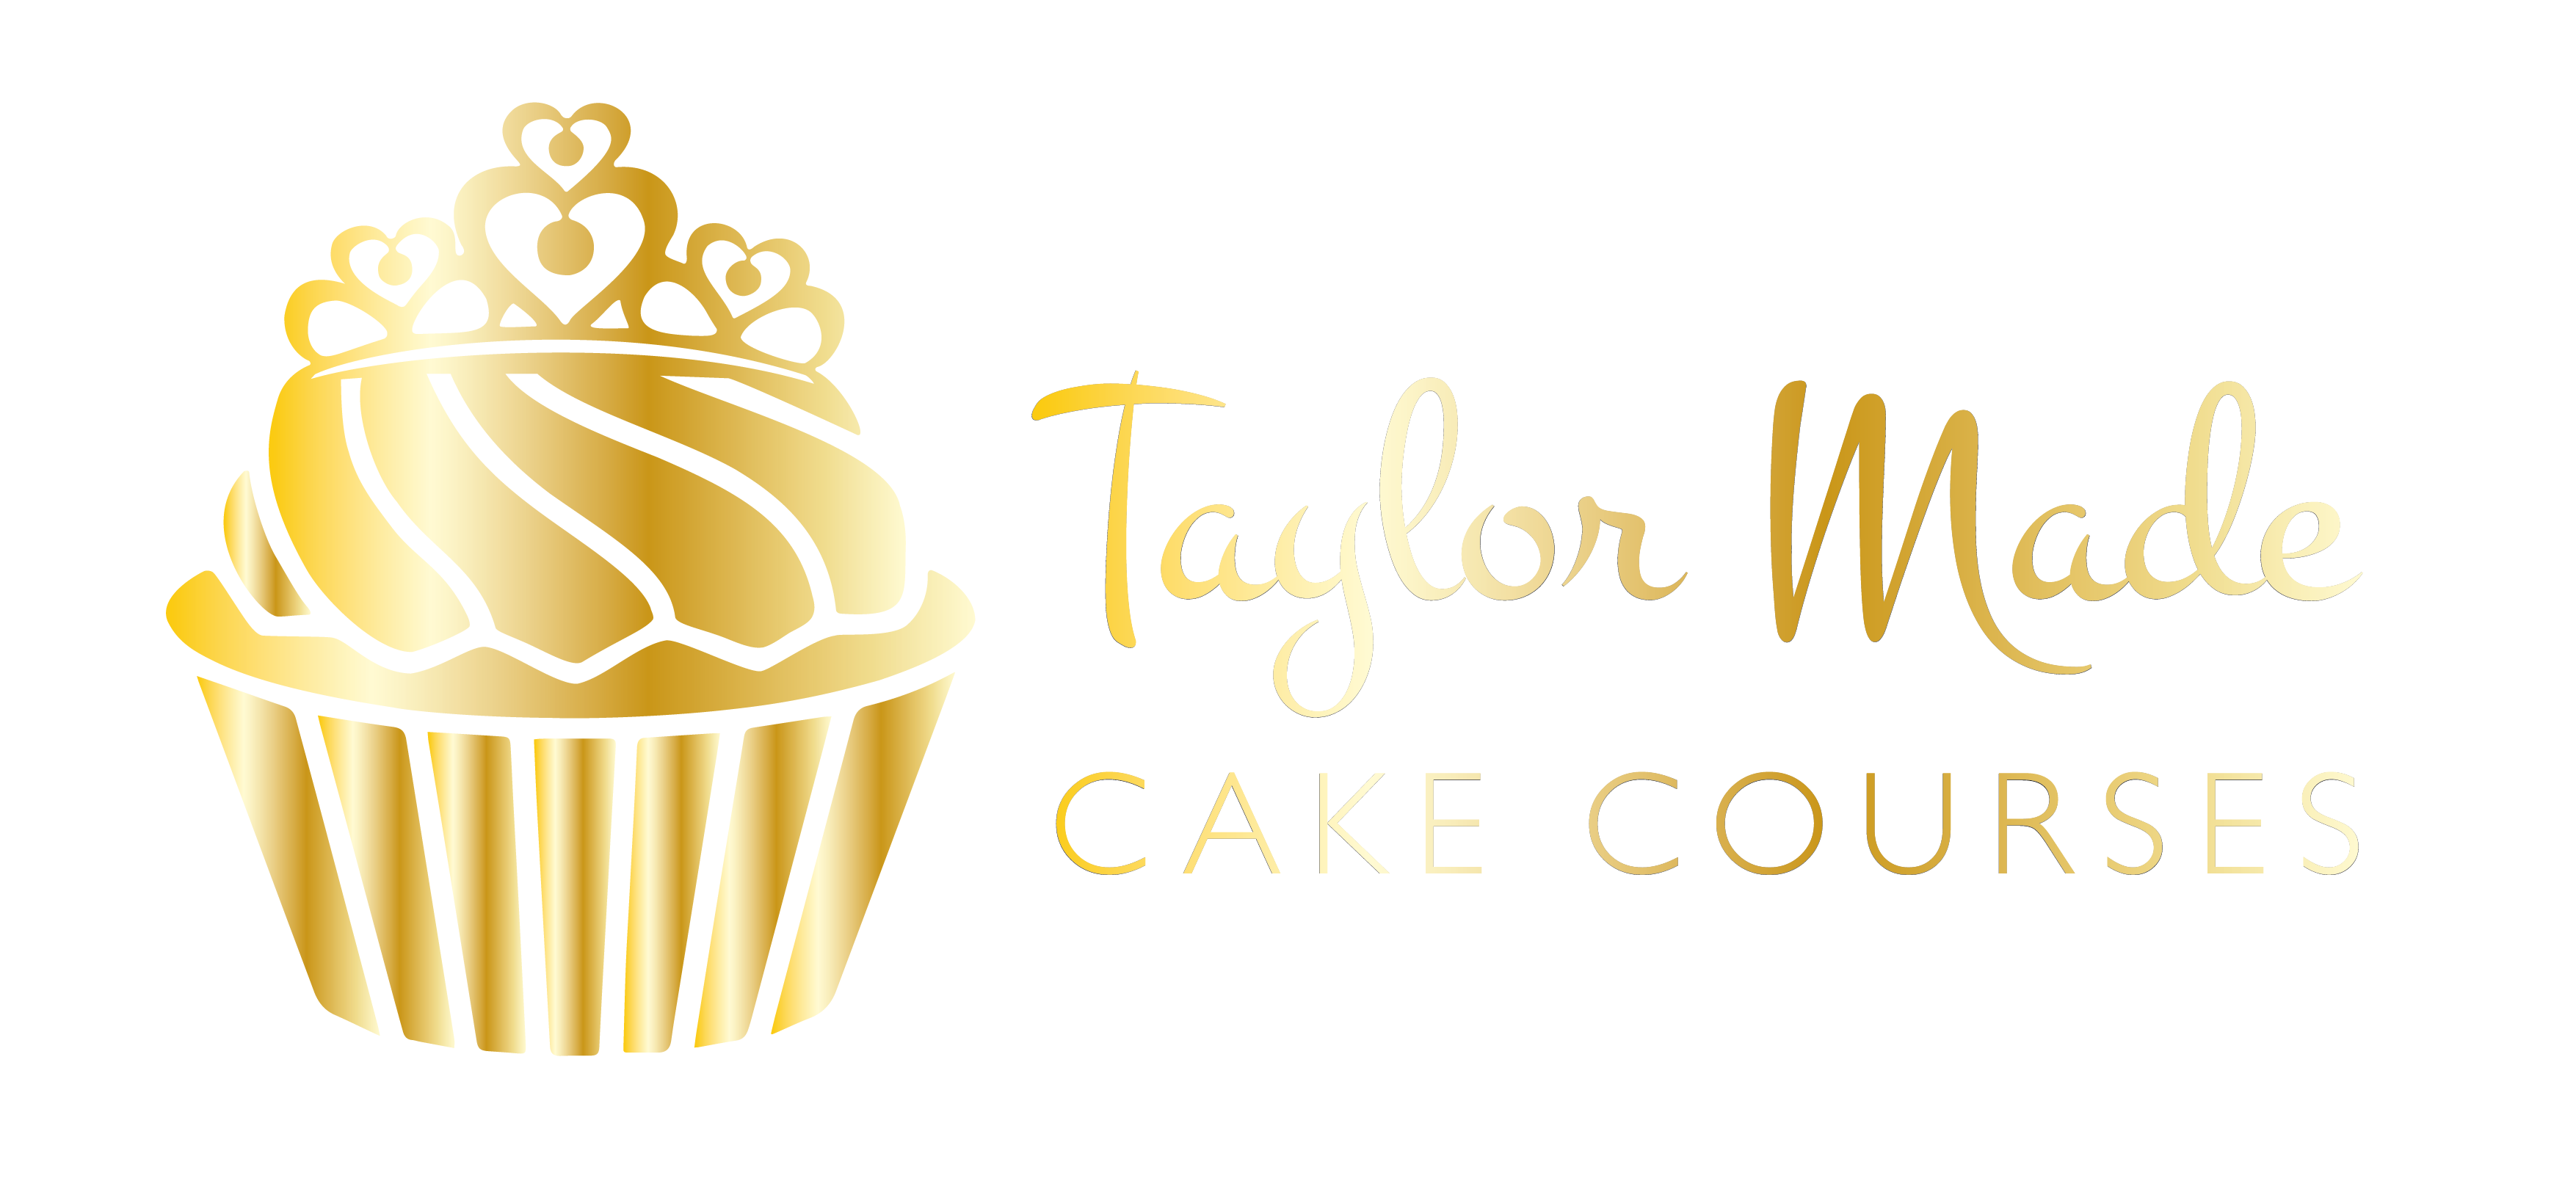 Vouchers Taylor Made Cake Courses Online Location 1 1